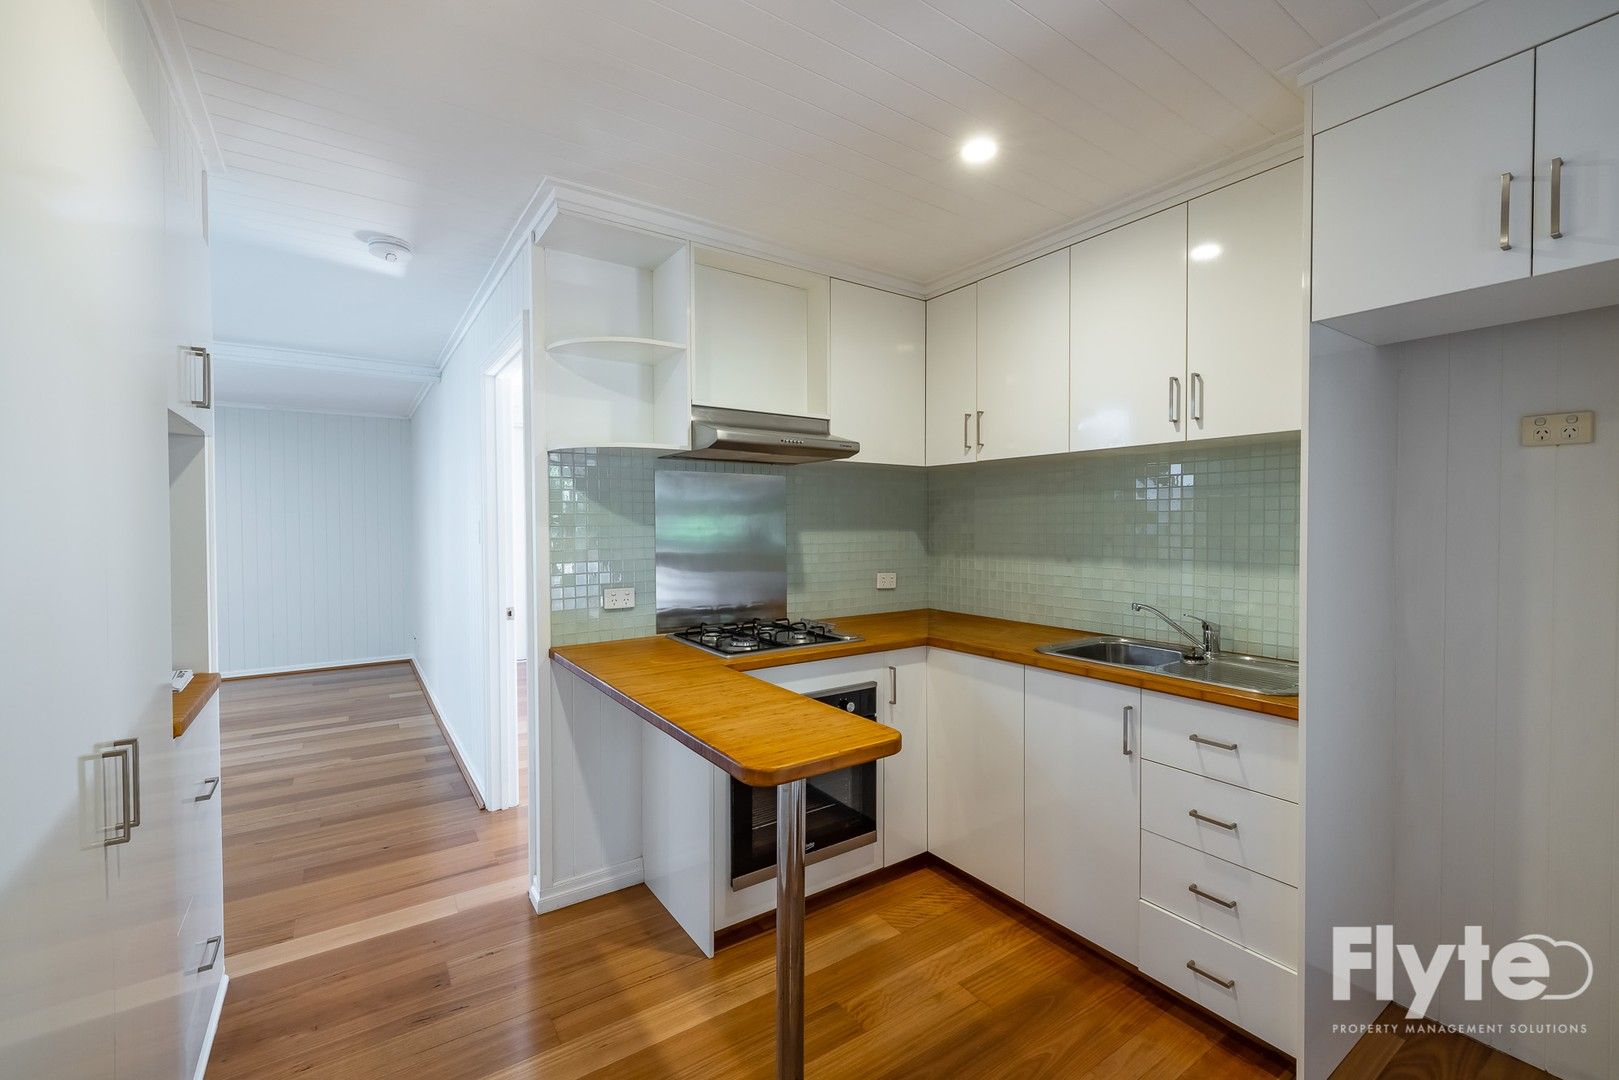 2 bedrooms Apartment / Unit / Flat in 24B Knowsley Street STONES CORNER QLD, 4120